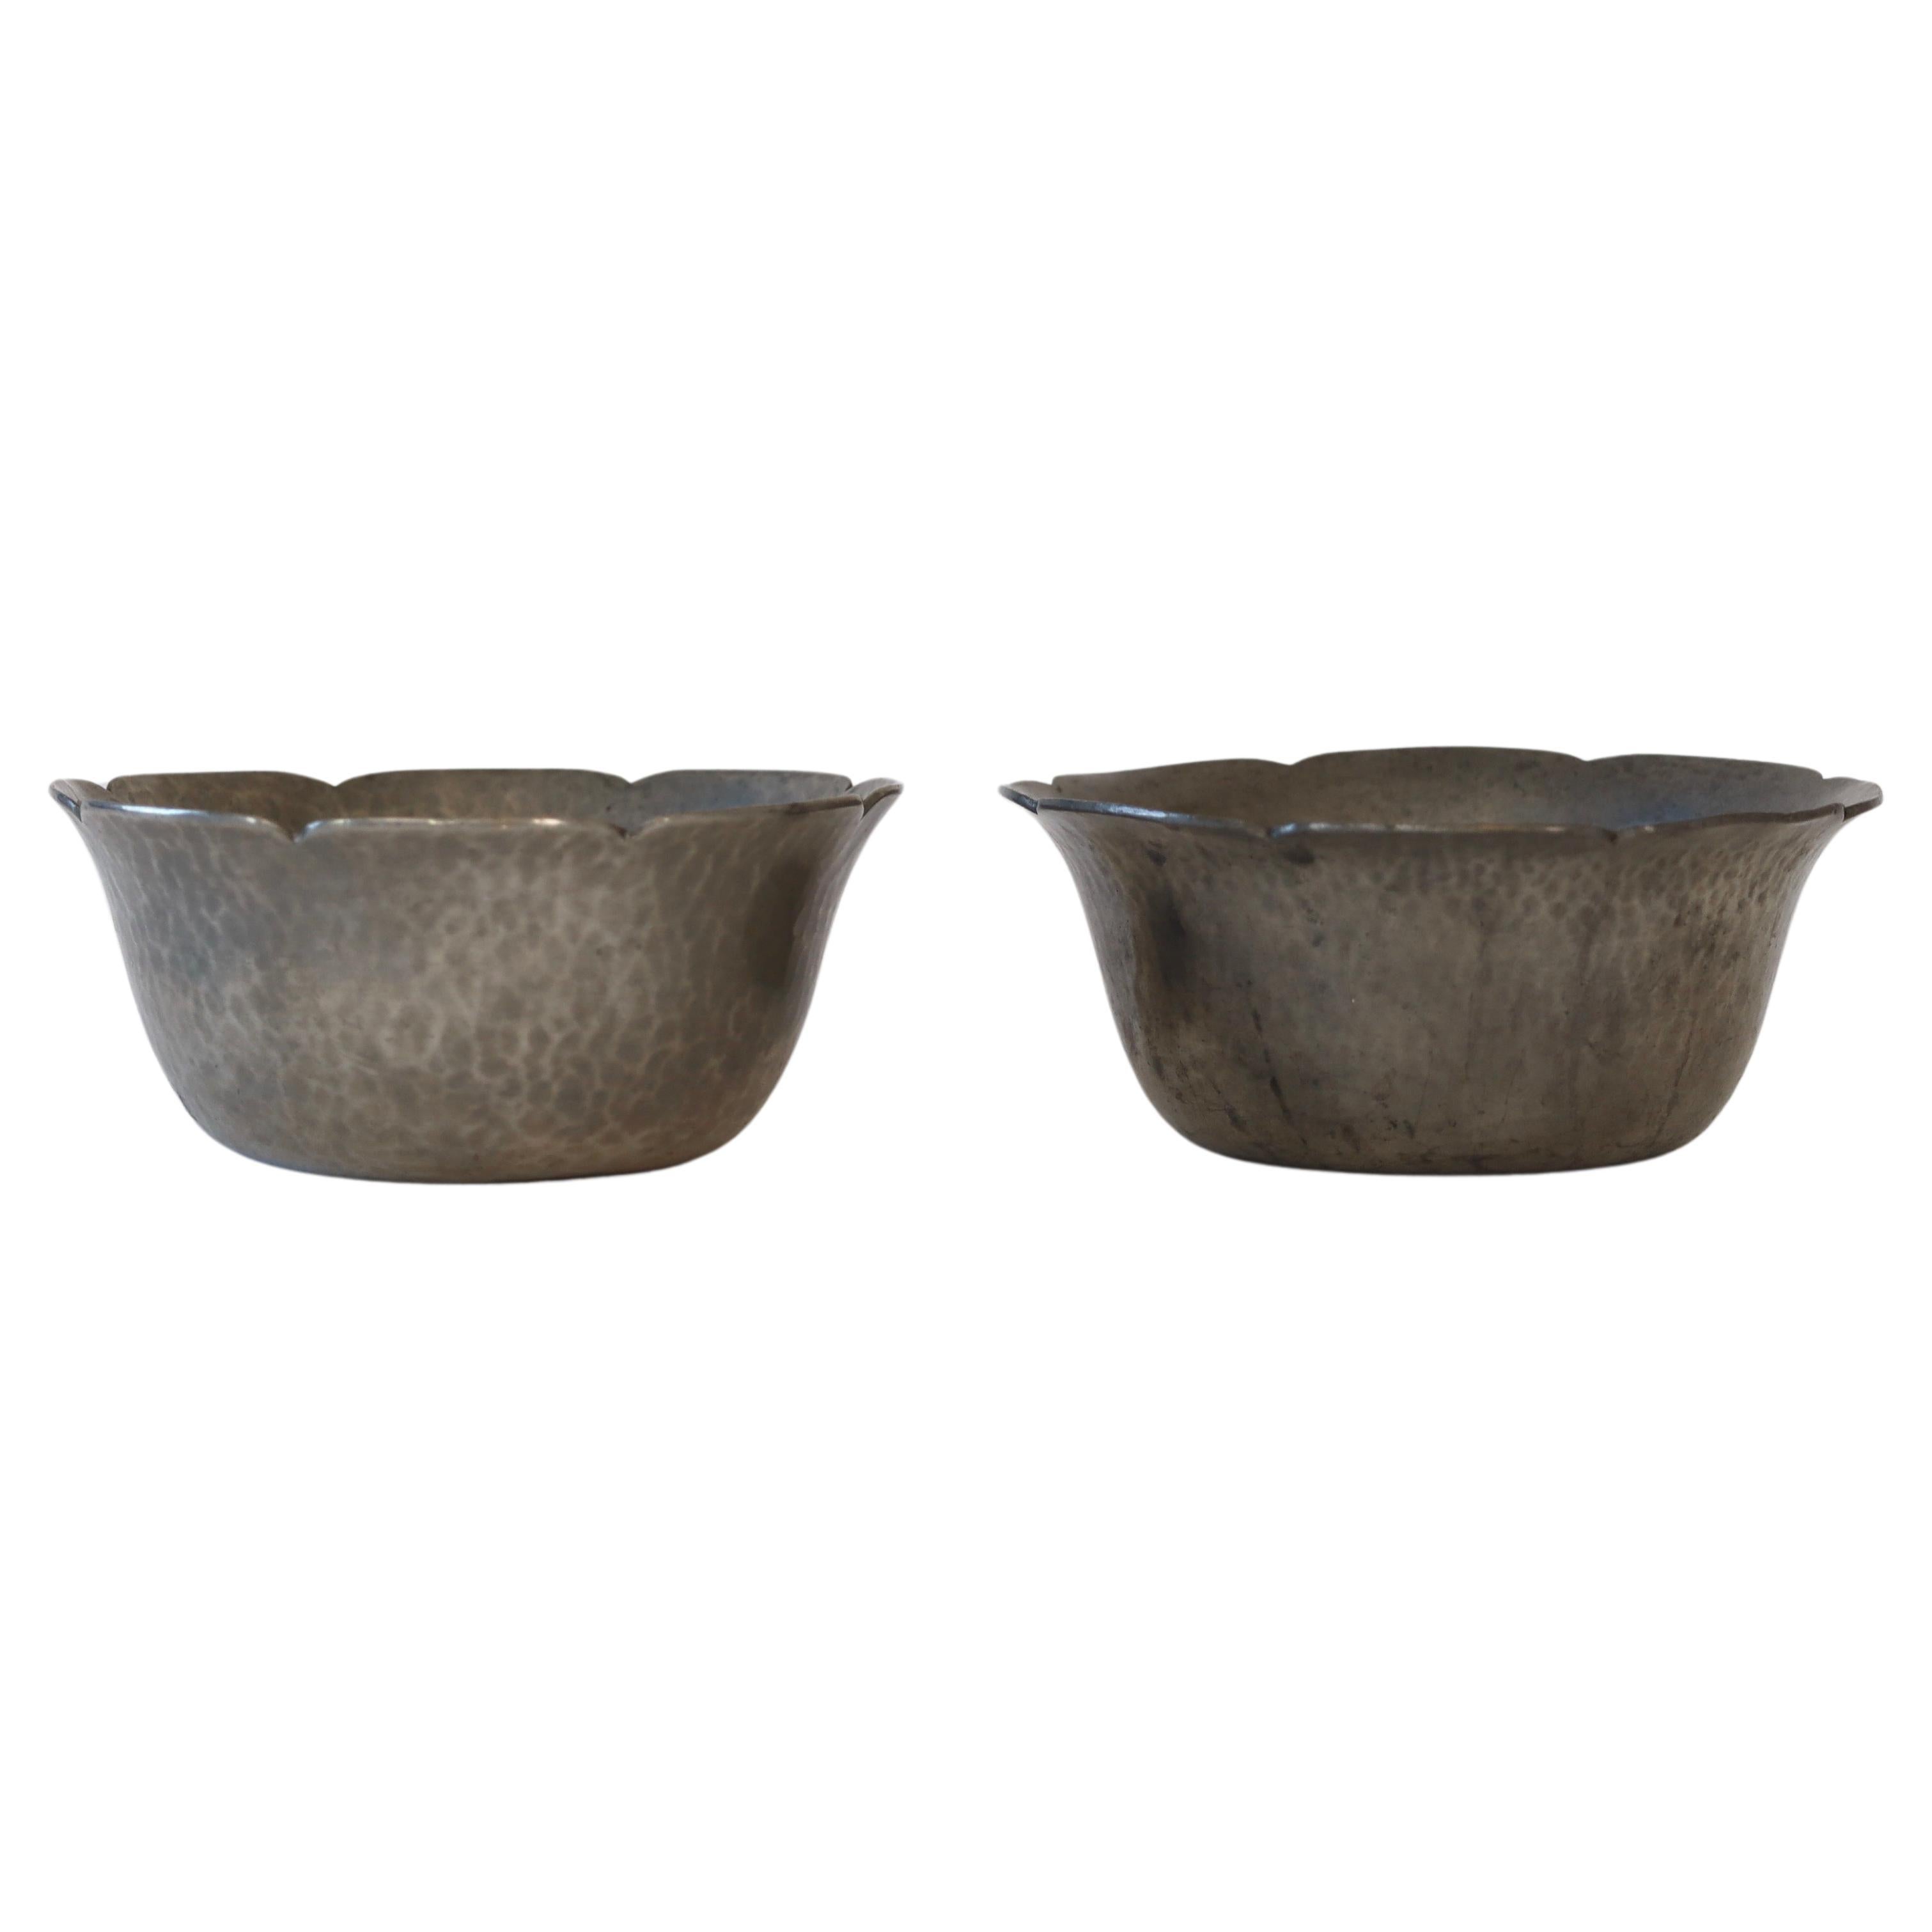 Set of hammered pewter bowls by Just Andersen, 1920s, Denmark